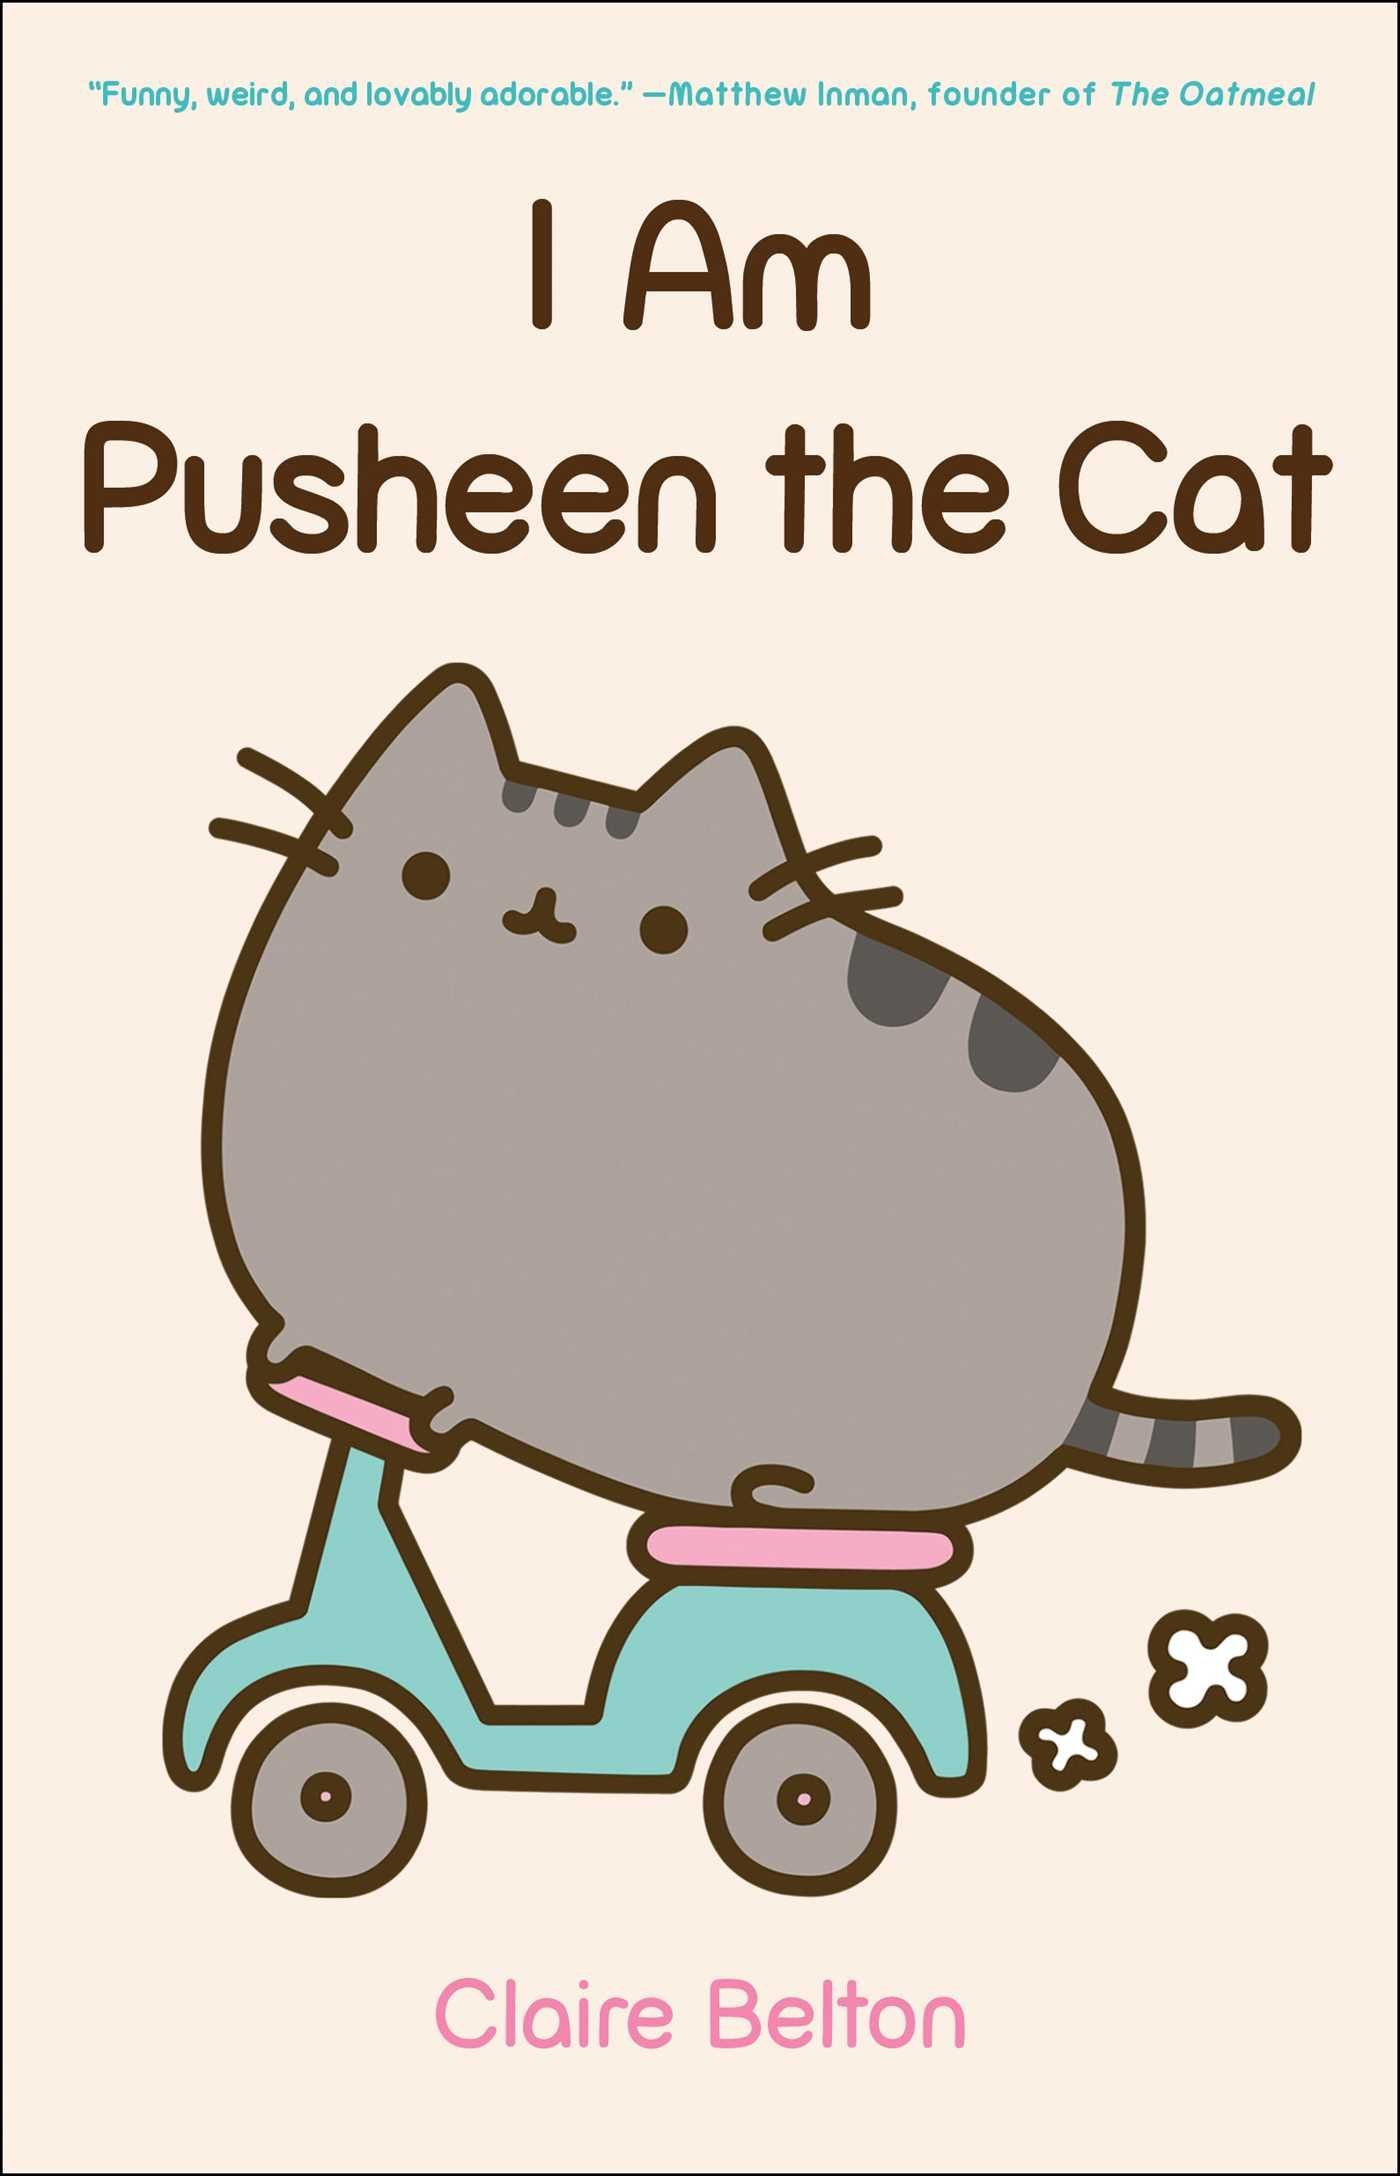 This debut collection of Pusheen comics has over 1 million copies in print.